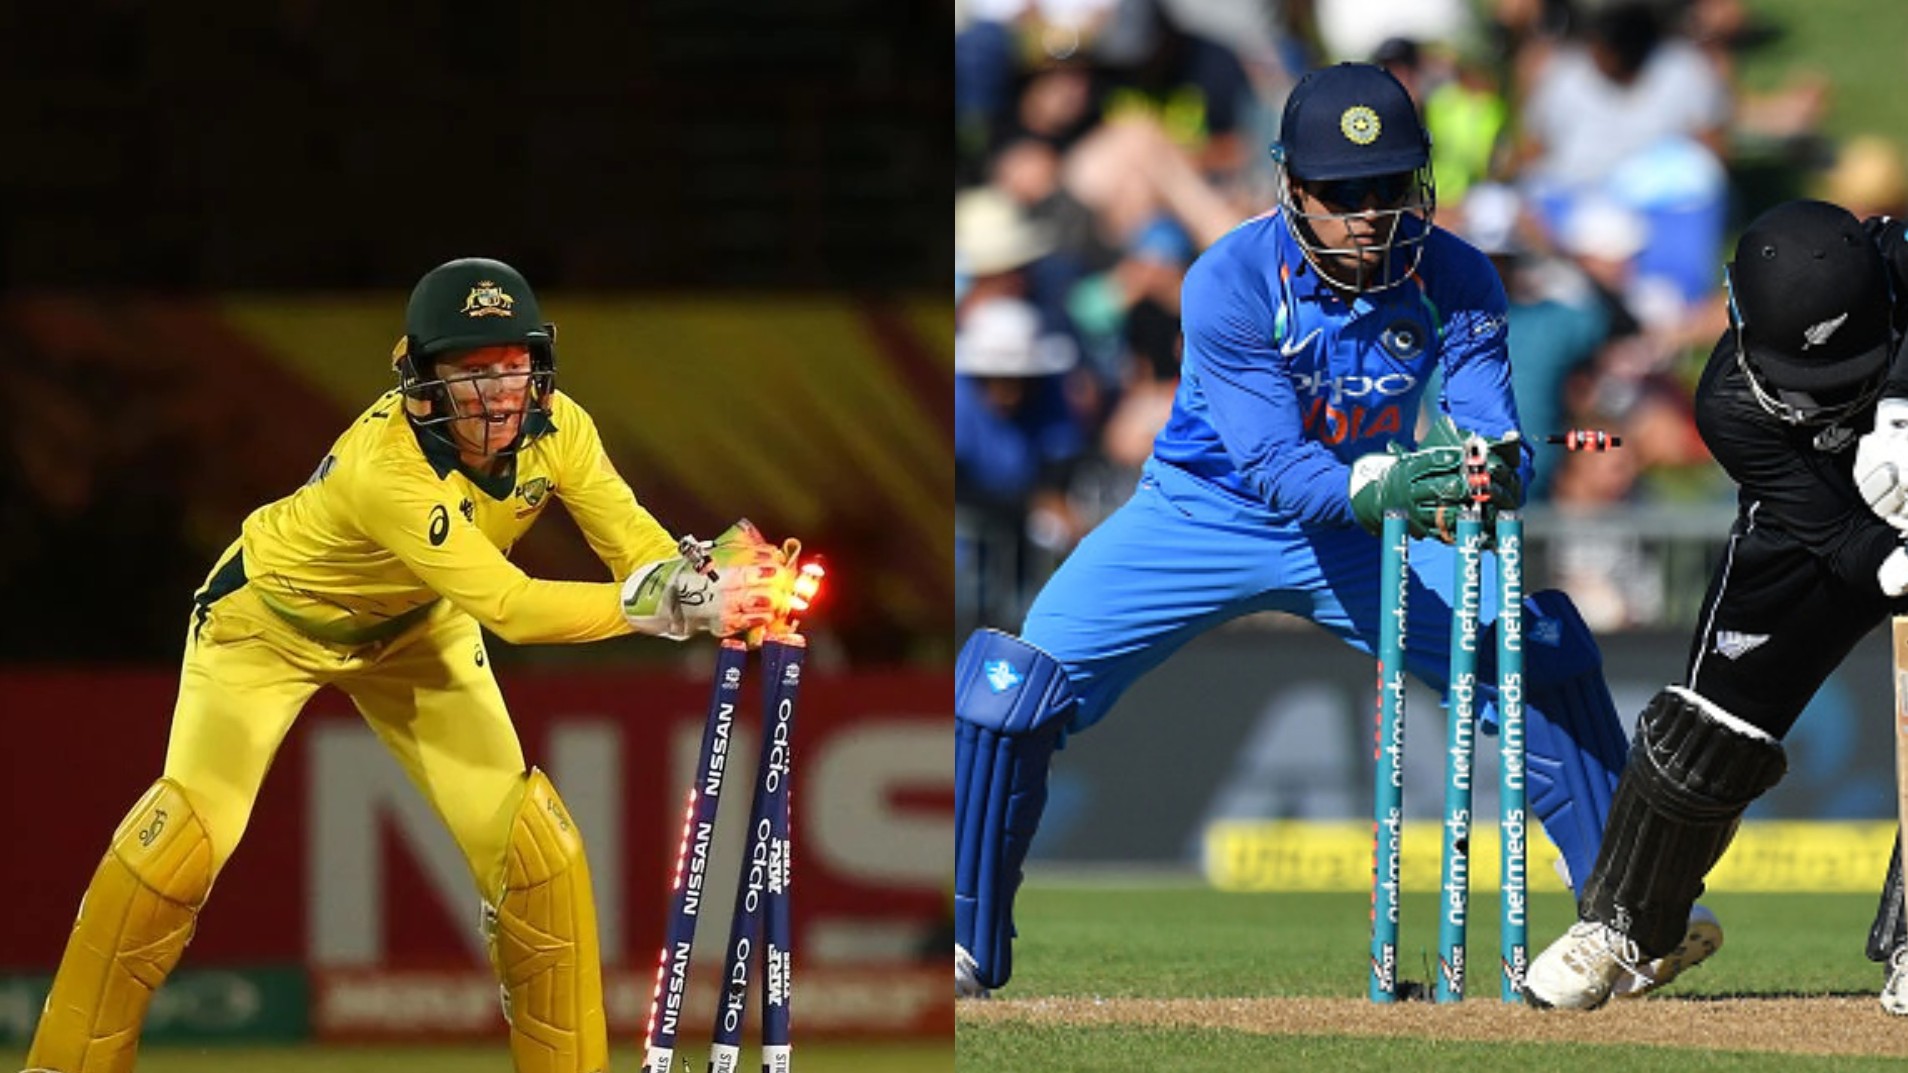 Stats - Alyssa Healy breaks MS Dhoni's record of most dismissals as wicket keeper in T20Is